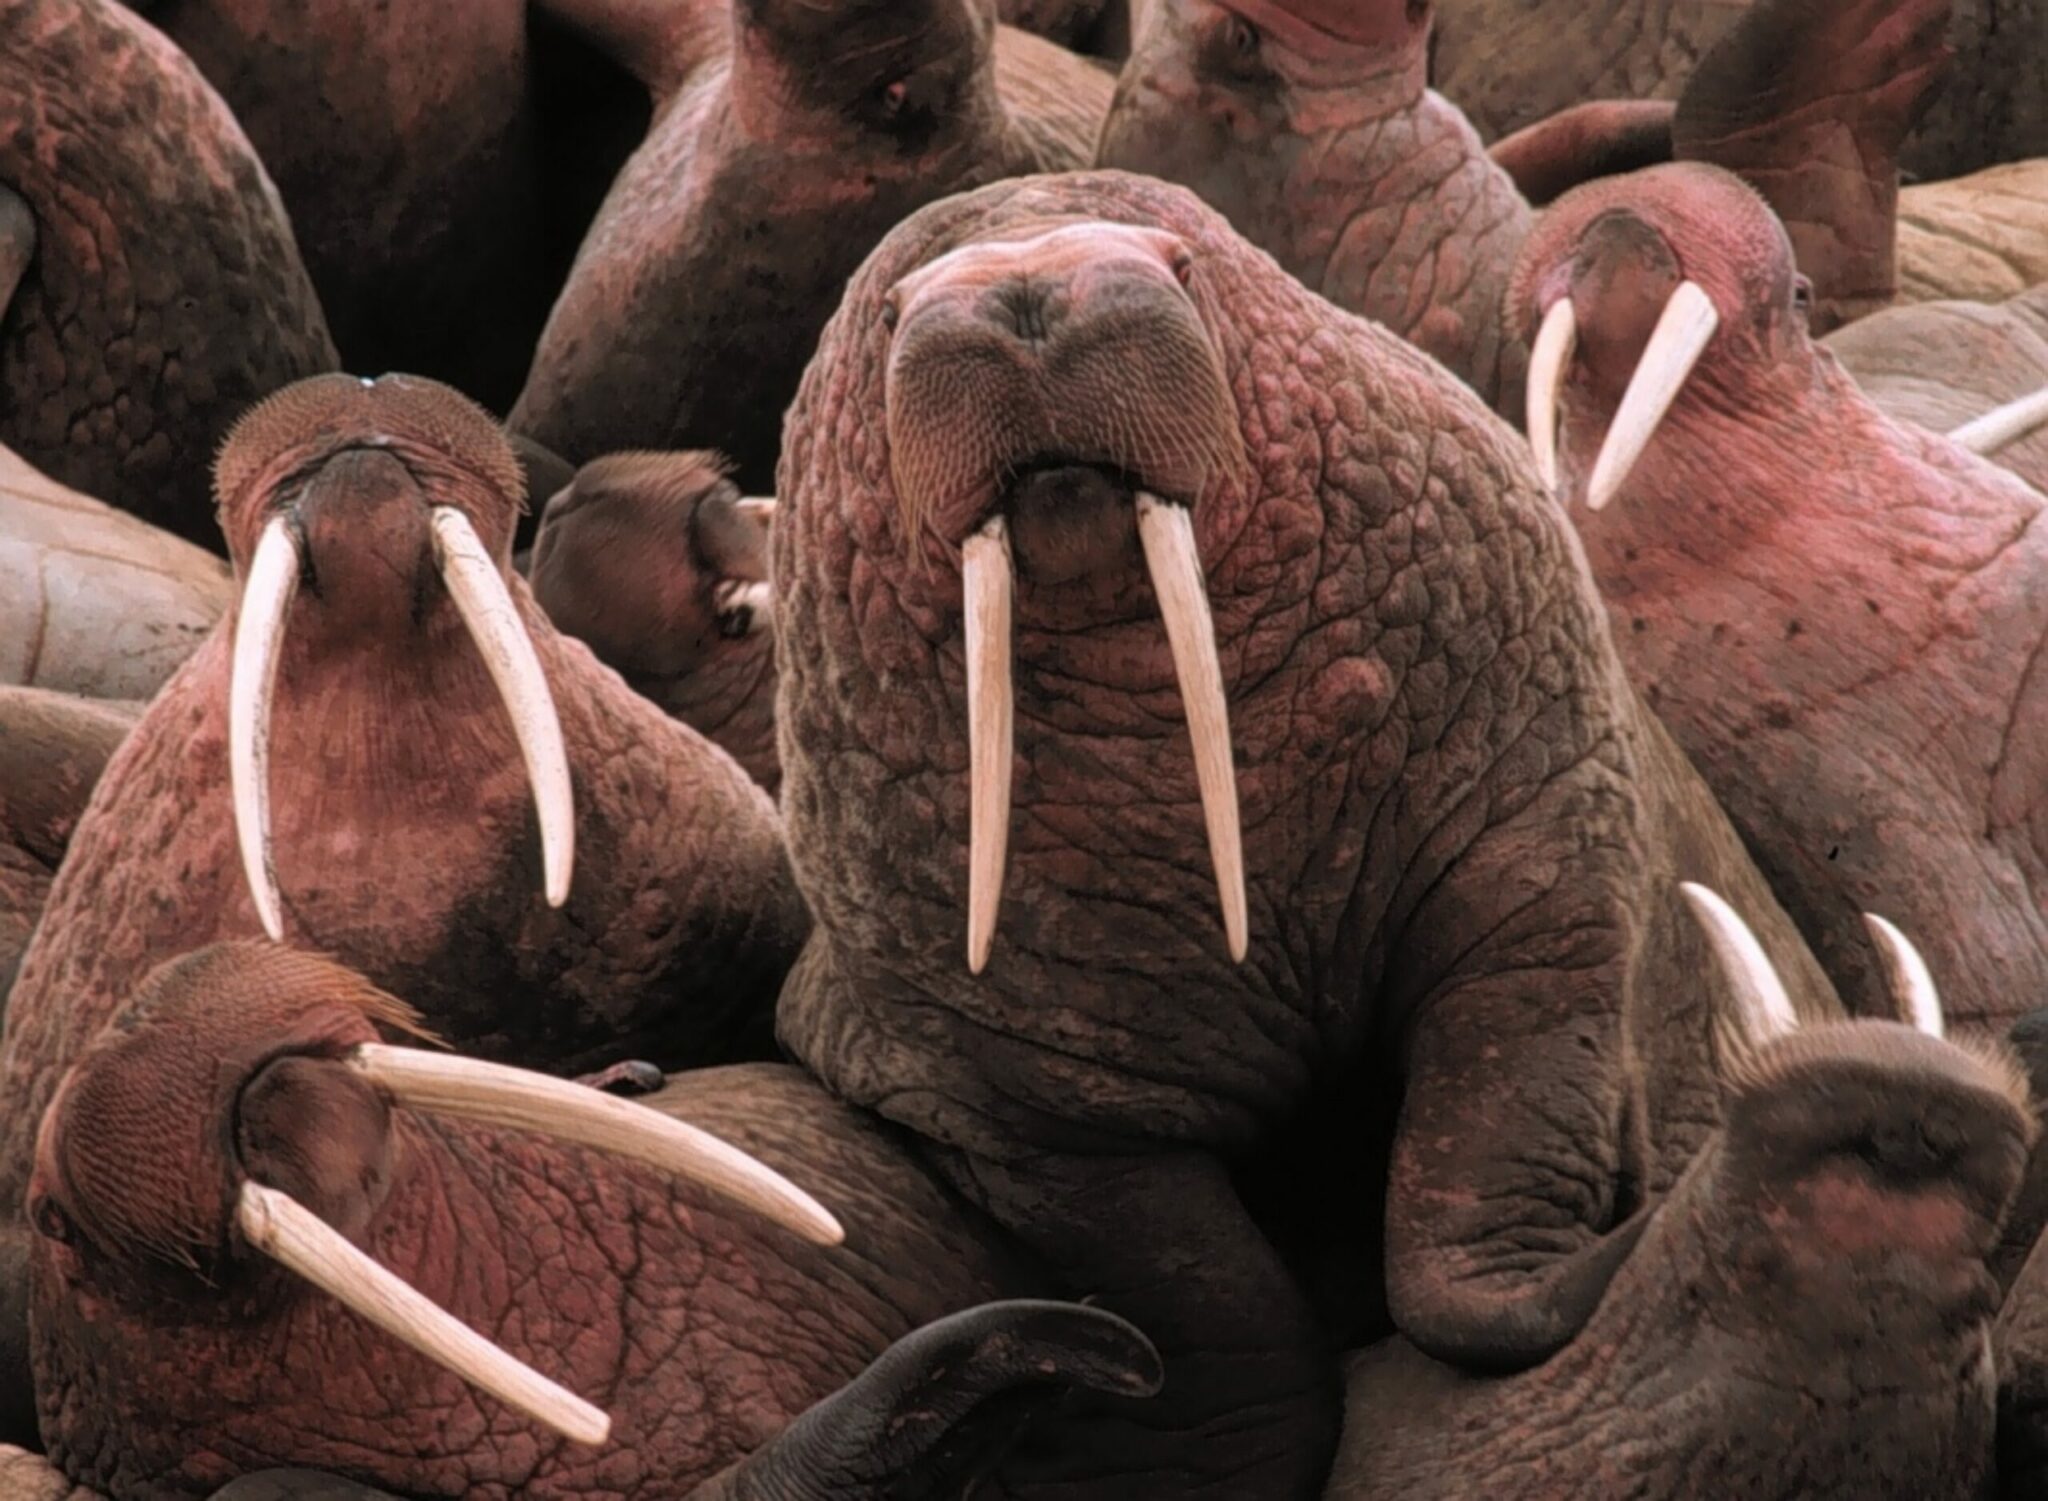 how long does a walrus live for and do walruses mate and reproduce on land or in the water